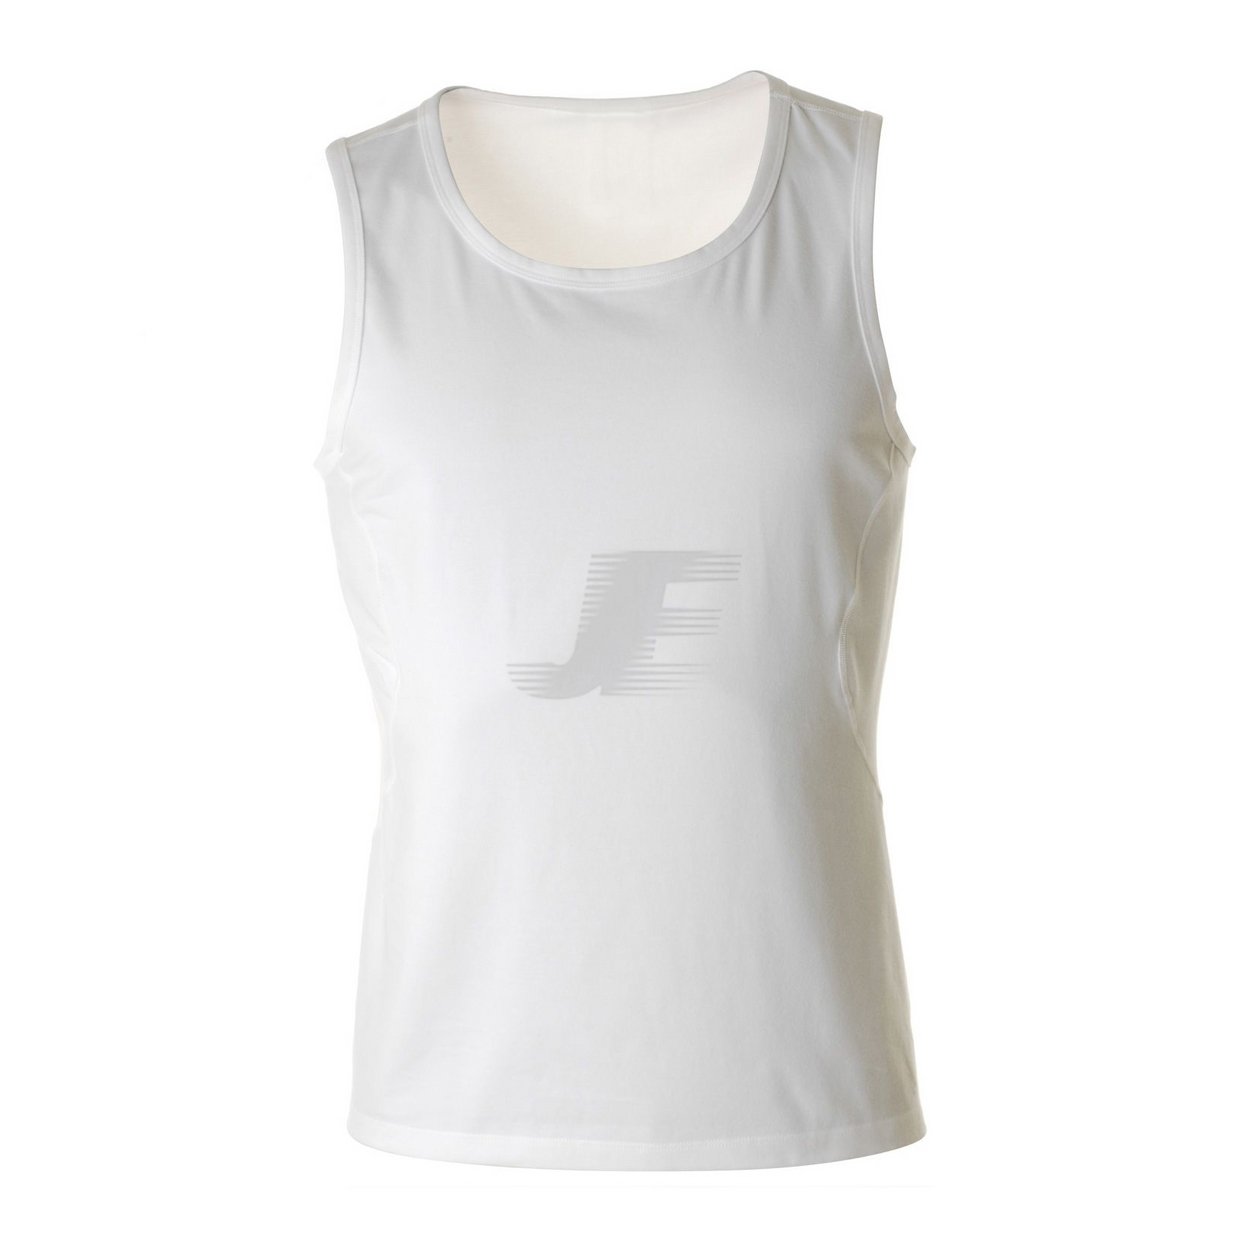 Mens Gym Working White Compression Tank Top